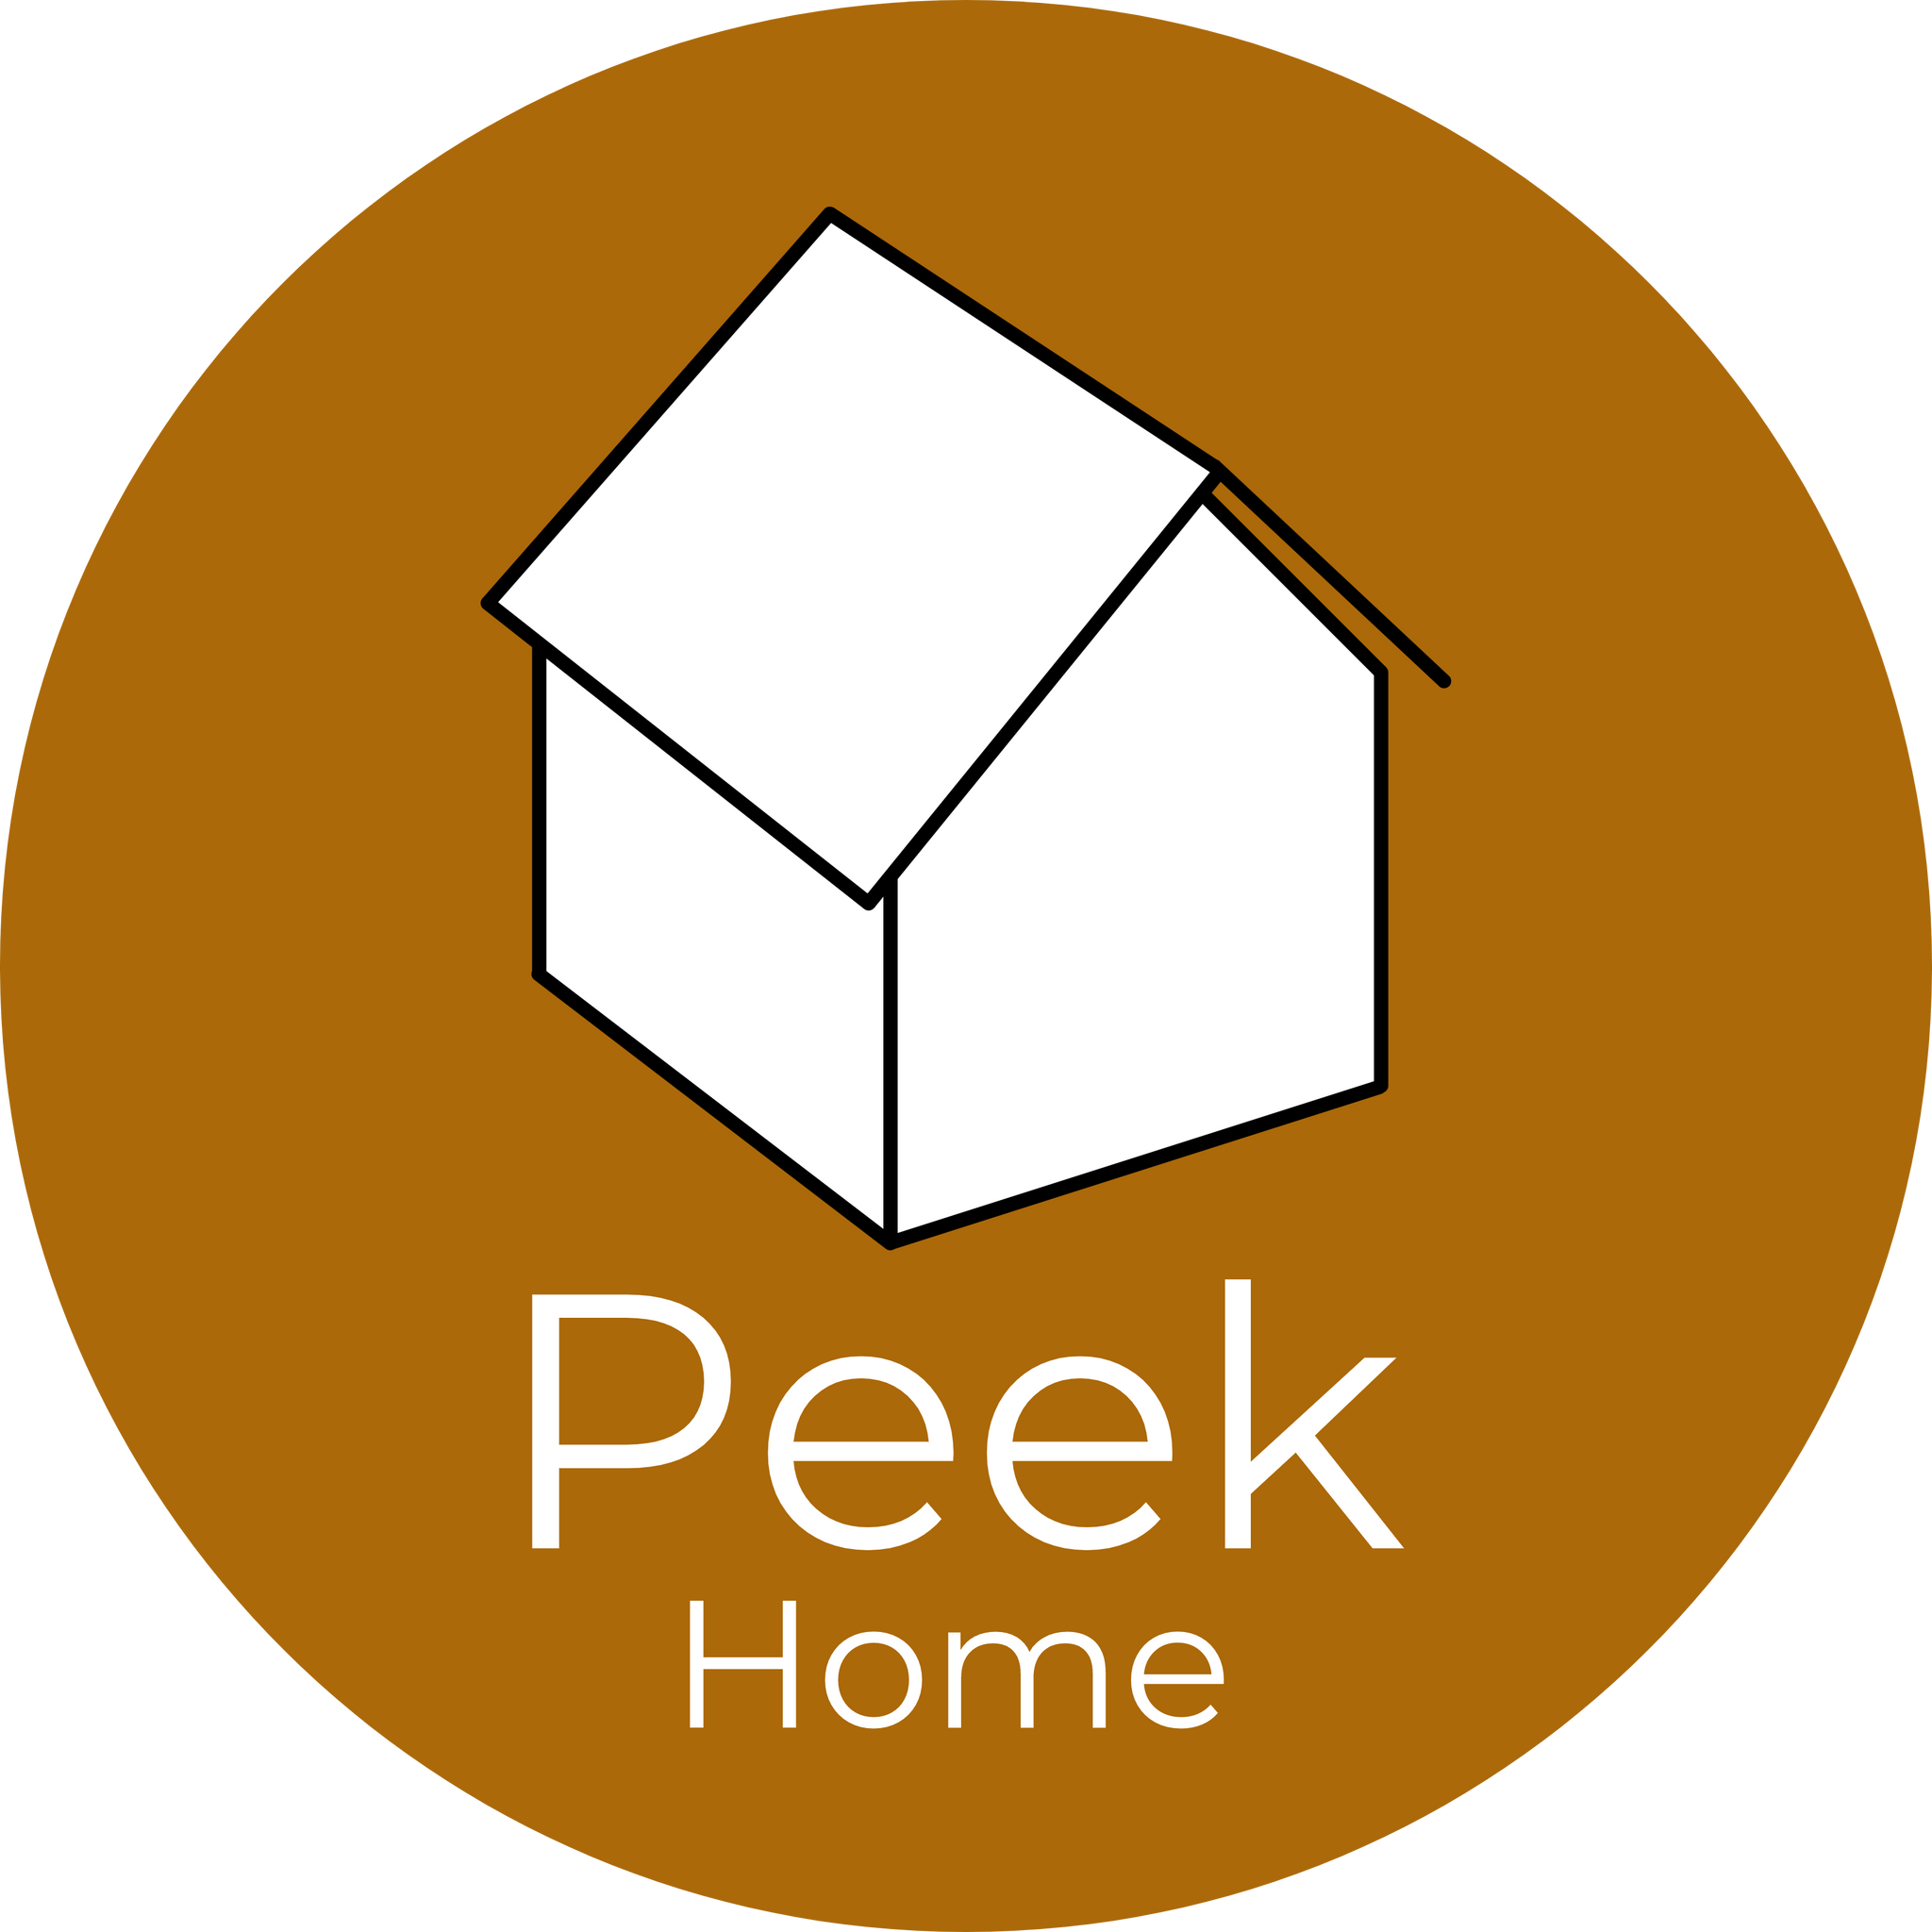 Peek Home - Online Sketch Designs For Your Home Ambitions